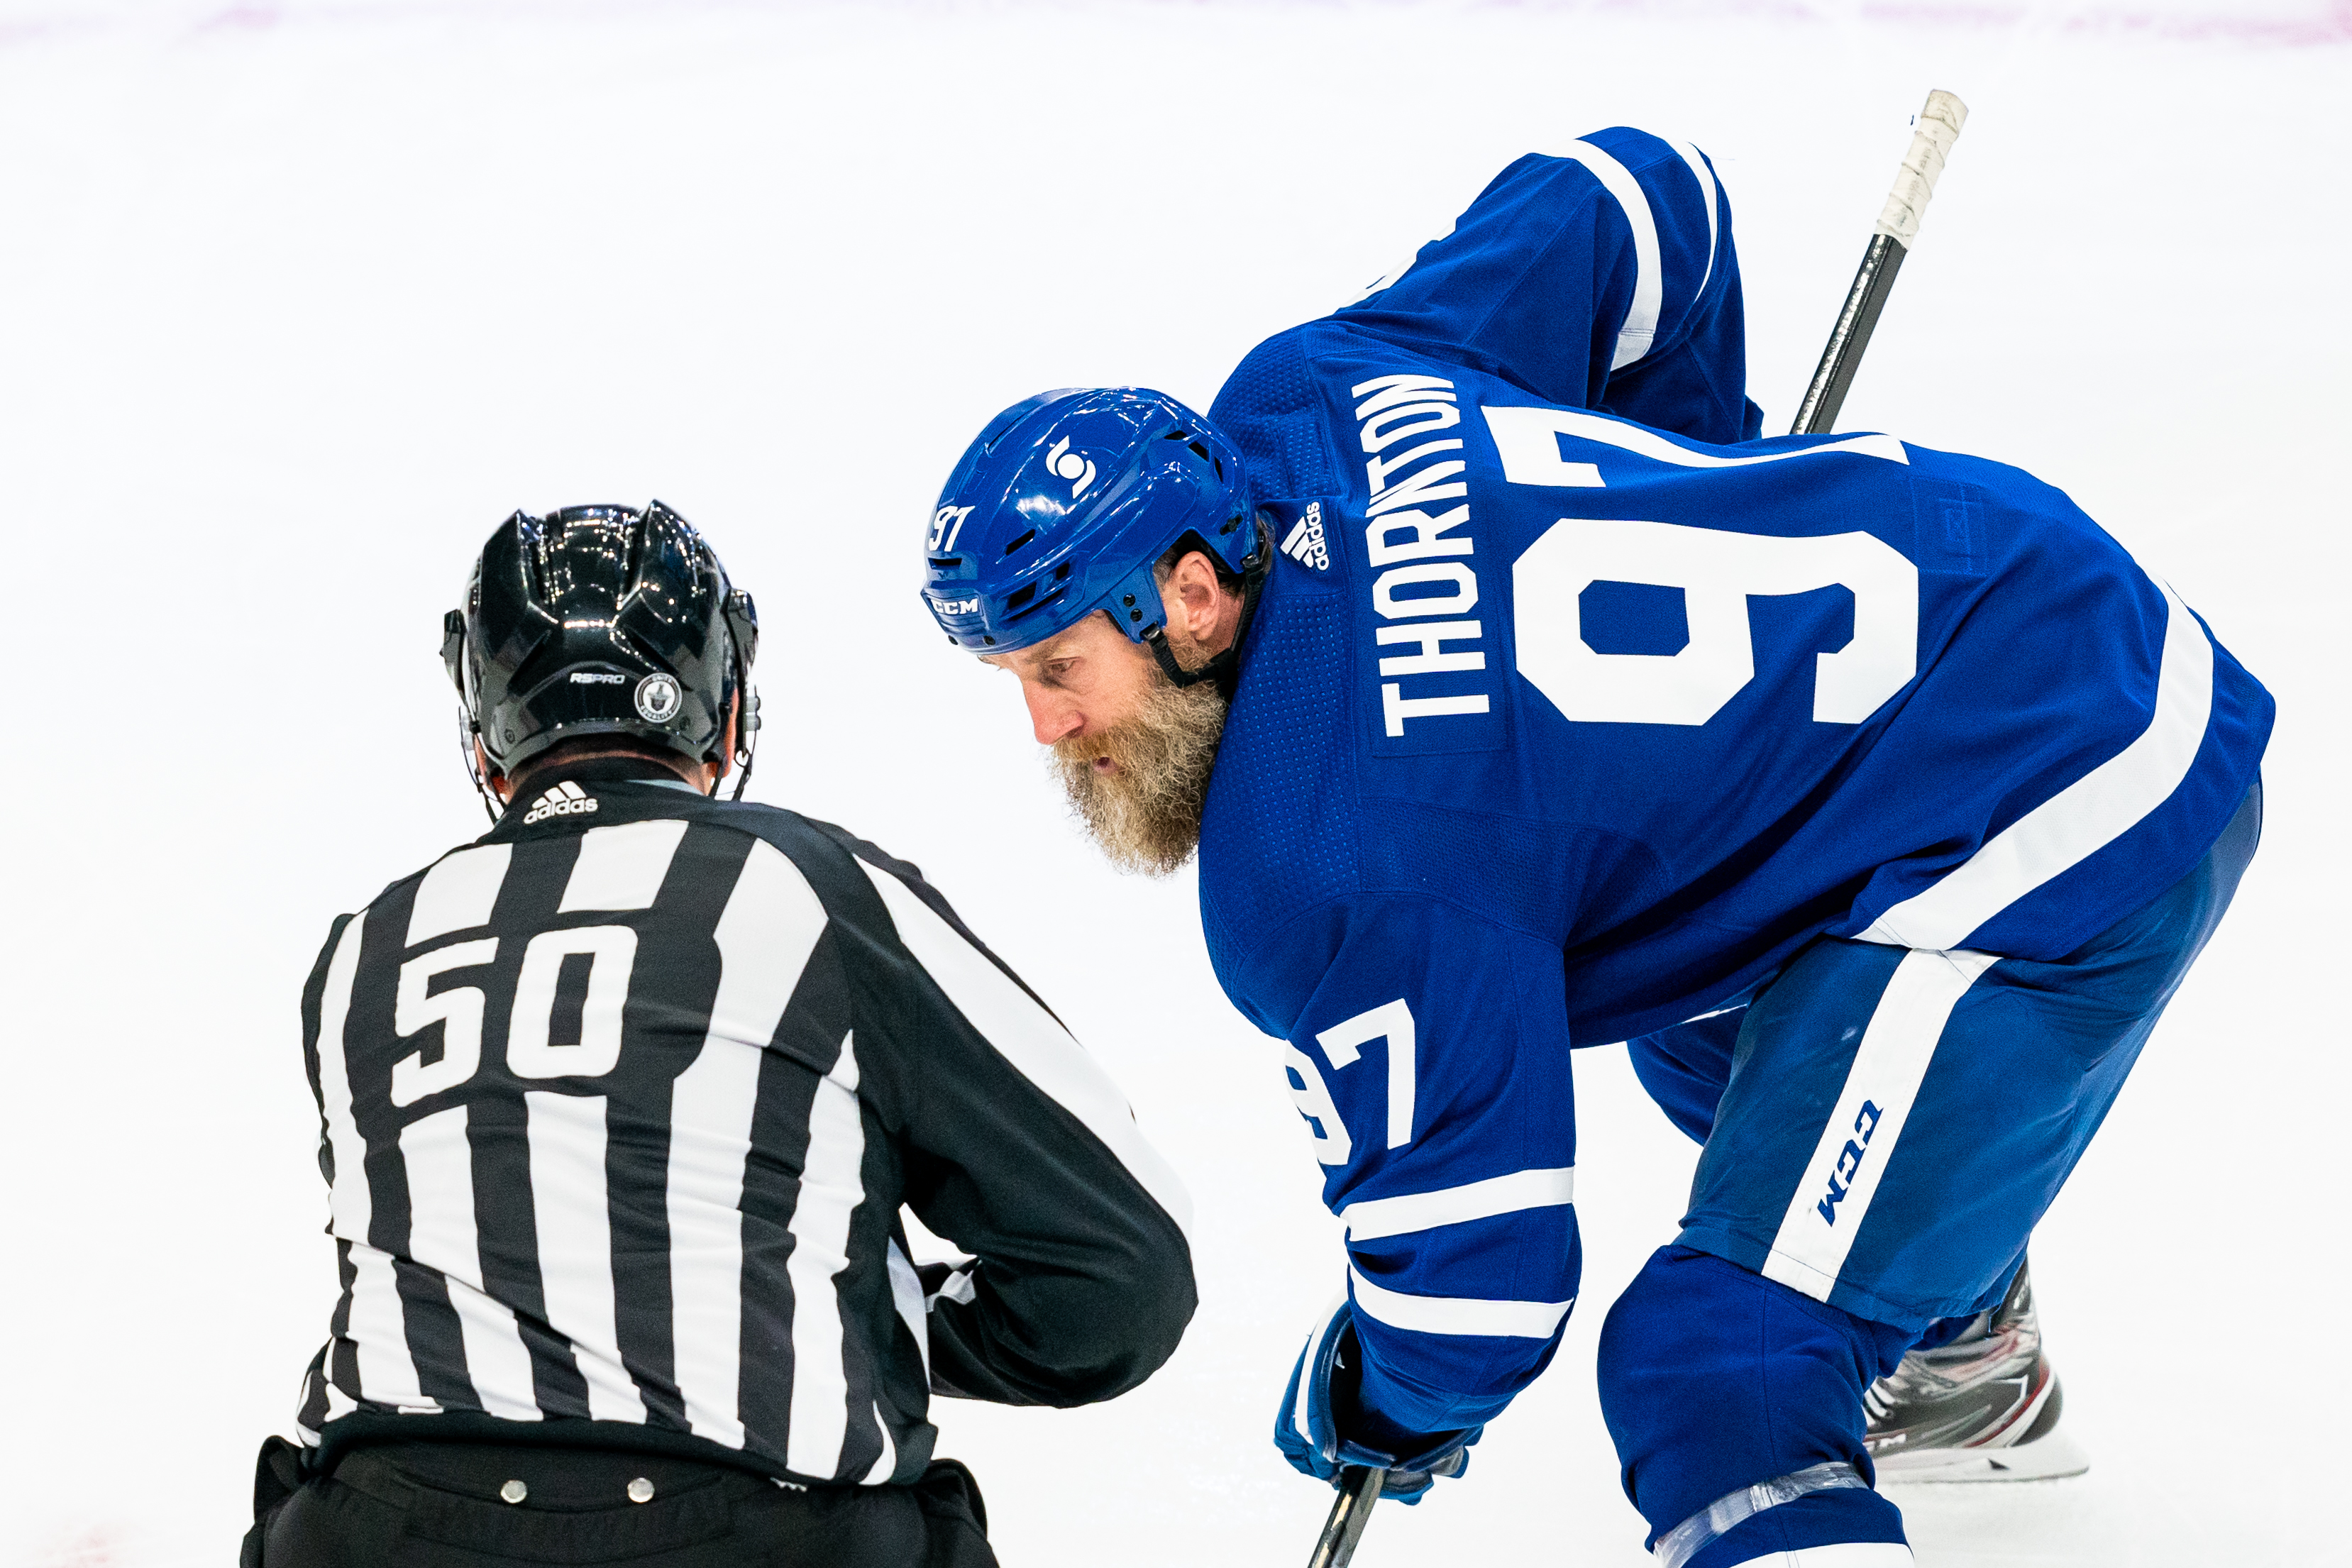 Joe Thornton #97 of the Toronto Maple Leafs sets to take a face-off against the Montreal Canadiens during the third period in Game Two of the First Round of the 2021 Stanley Cup Playoffs at the Scotiabank Arena on May 22, 2021 in Toronto, Ontario, Canada.